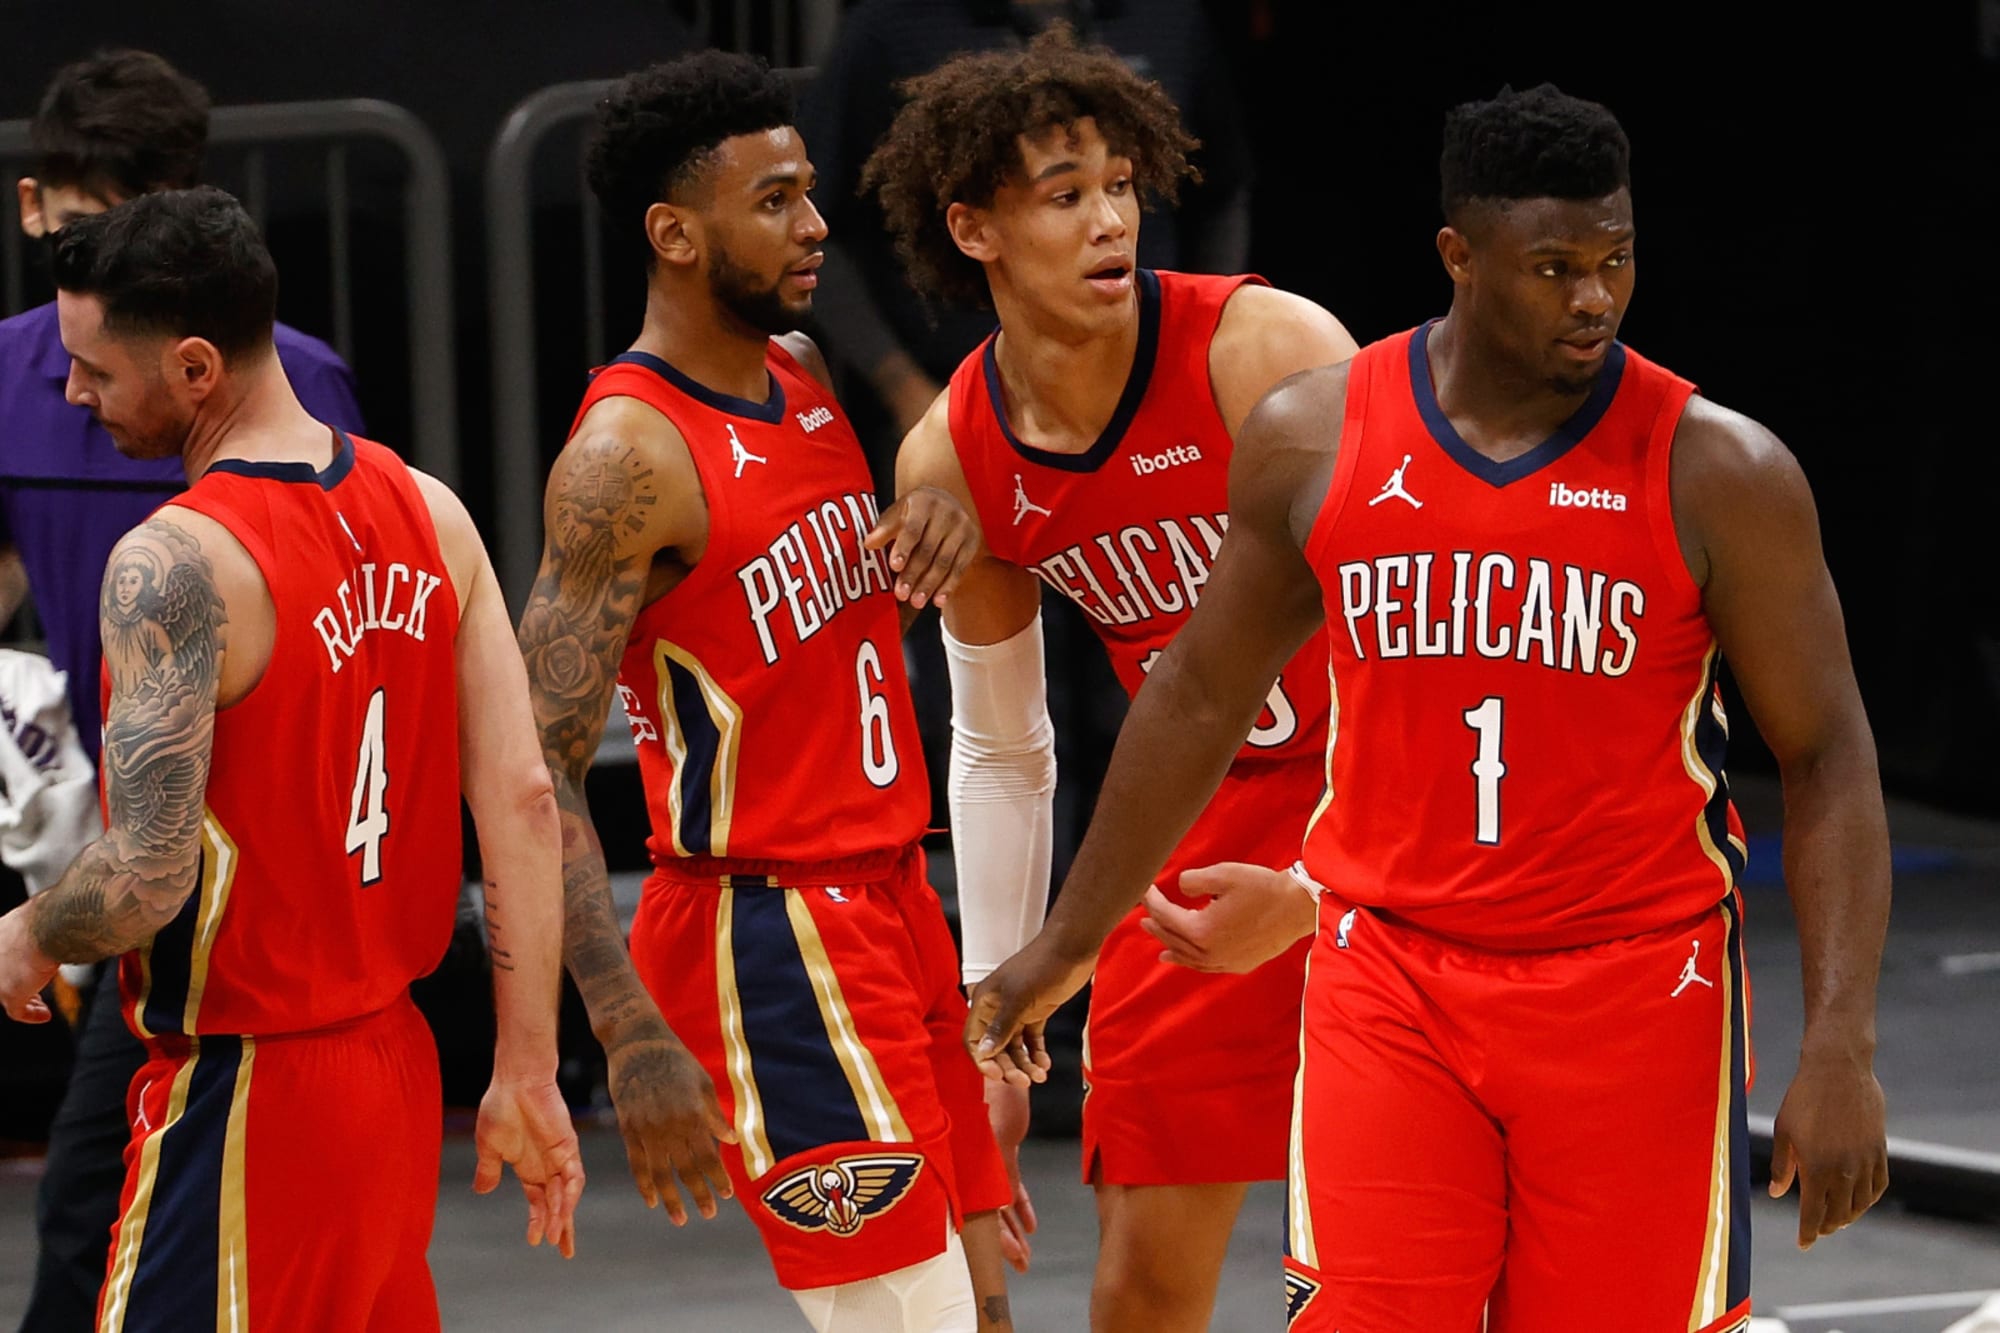 New Orleans Pelicans 3 players primed for a breakout season